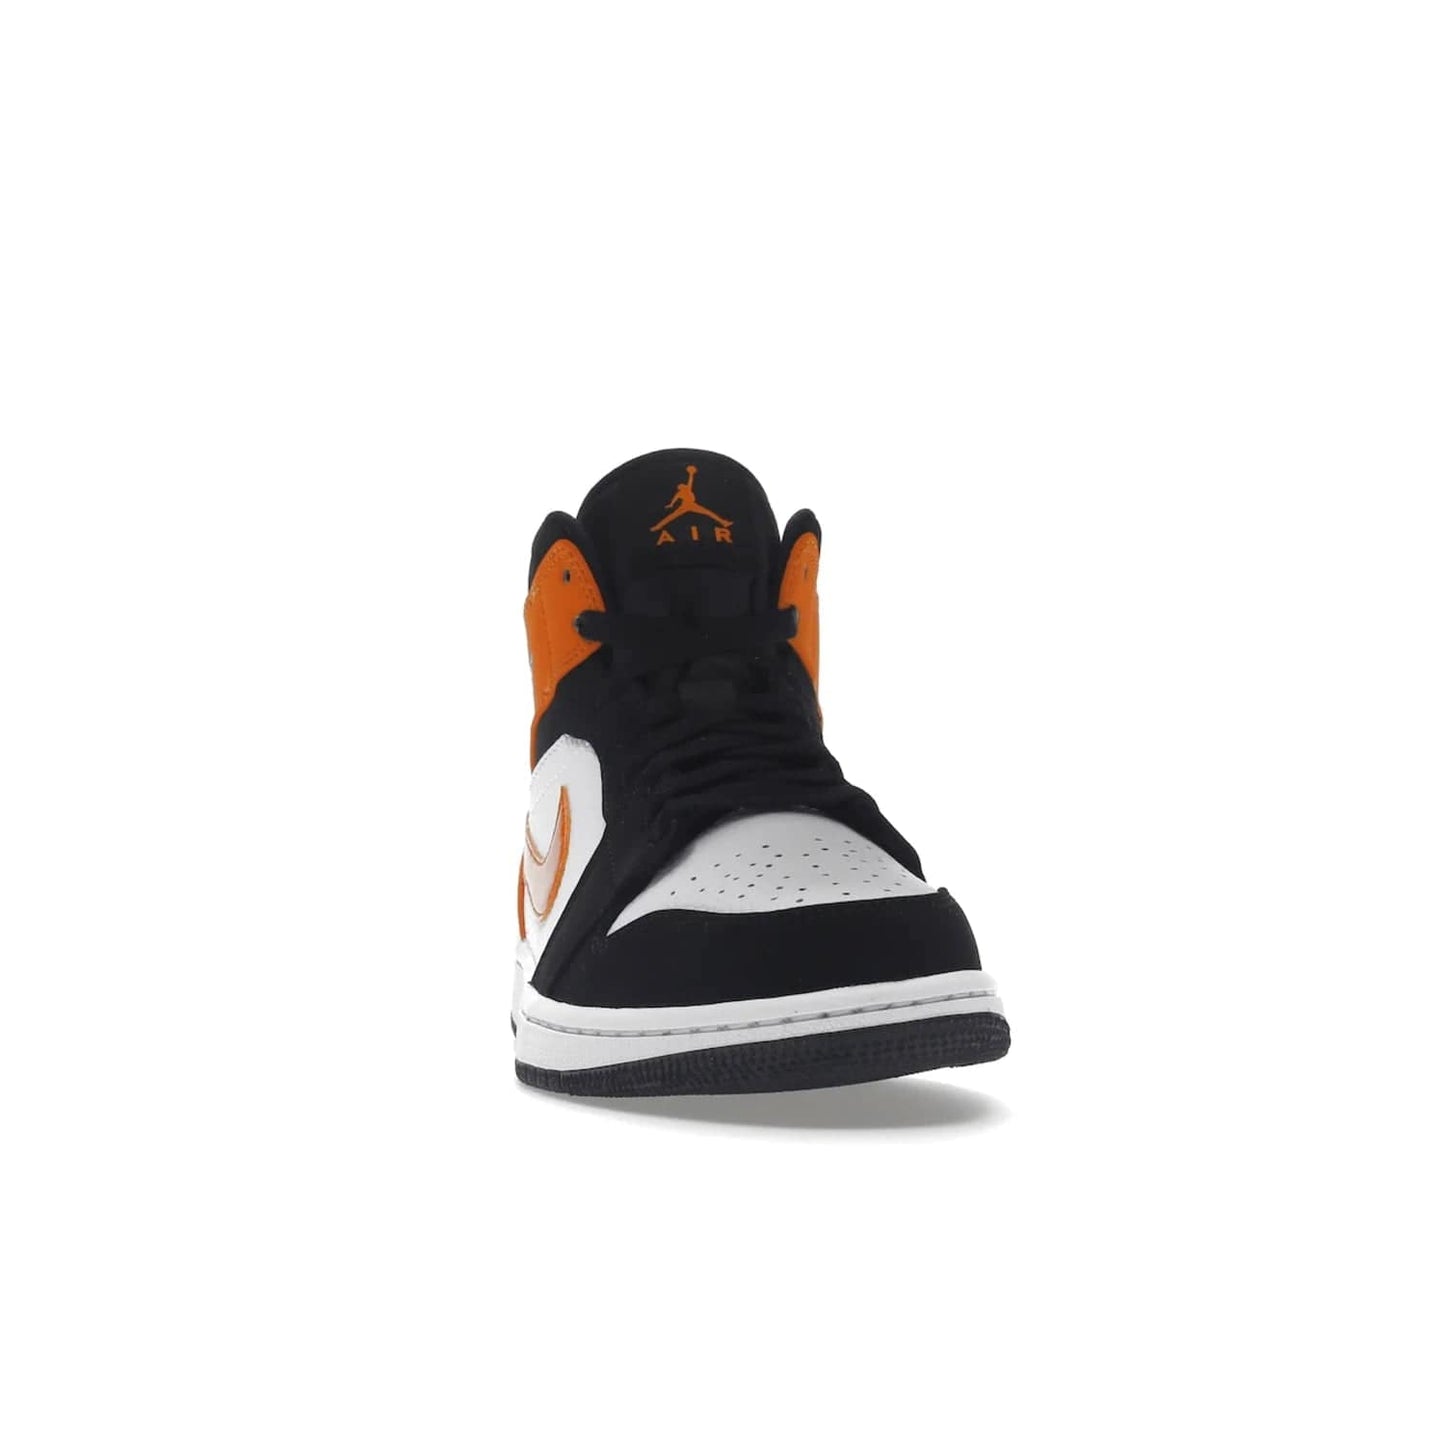 Jordan 1 Mid Shattered Backboard - Image 9 - Only at www.BallersClubKickz.com - The Air Jordan 1 Mid Shattered Backboard offers a timeless Black/White-Starfish colorway. Classic Swoosh logo and AJ insignia plus a shatterd backboard graphic on the insole. Get your pair today!